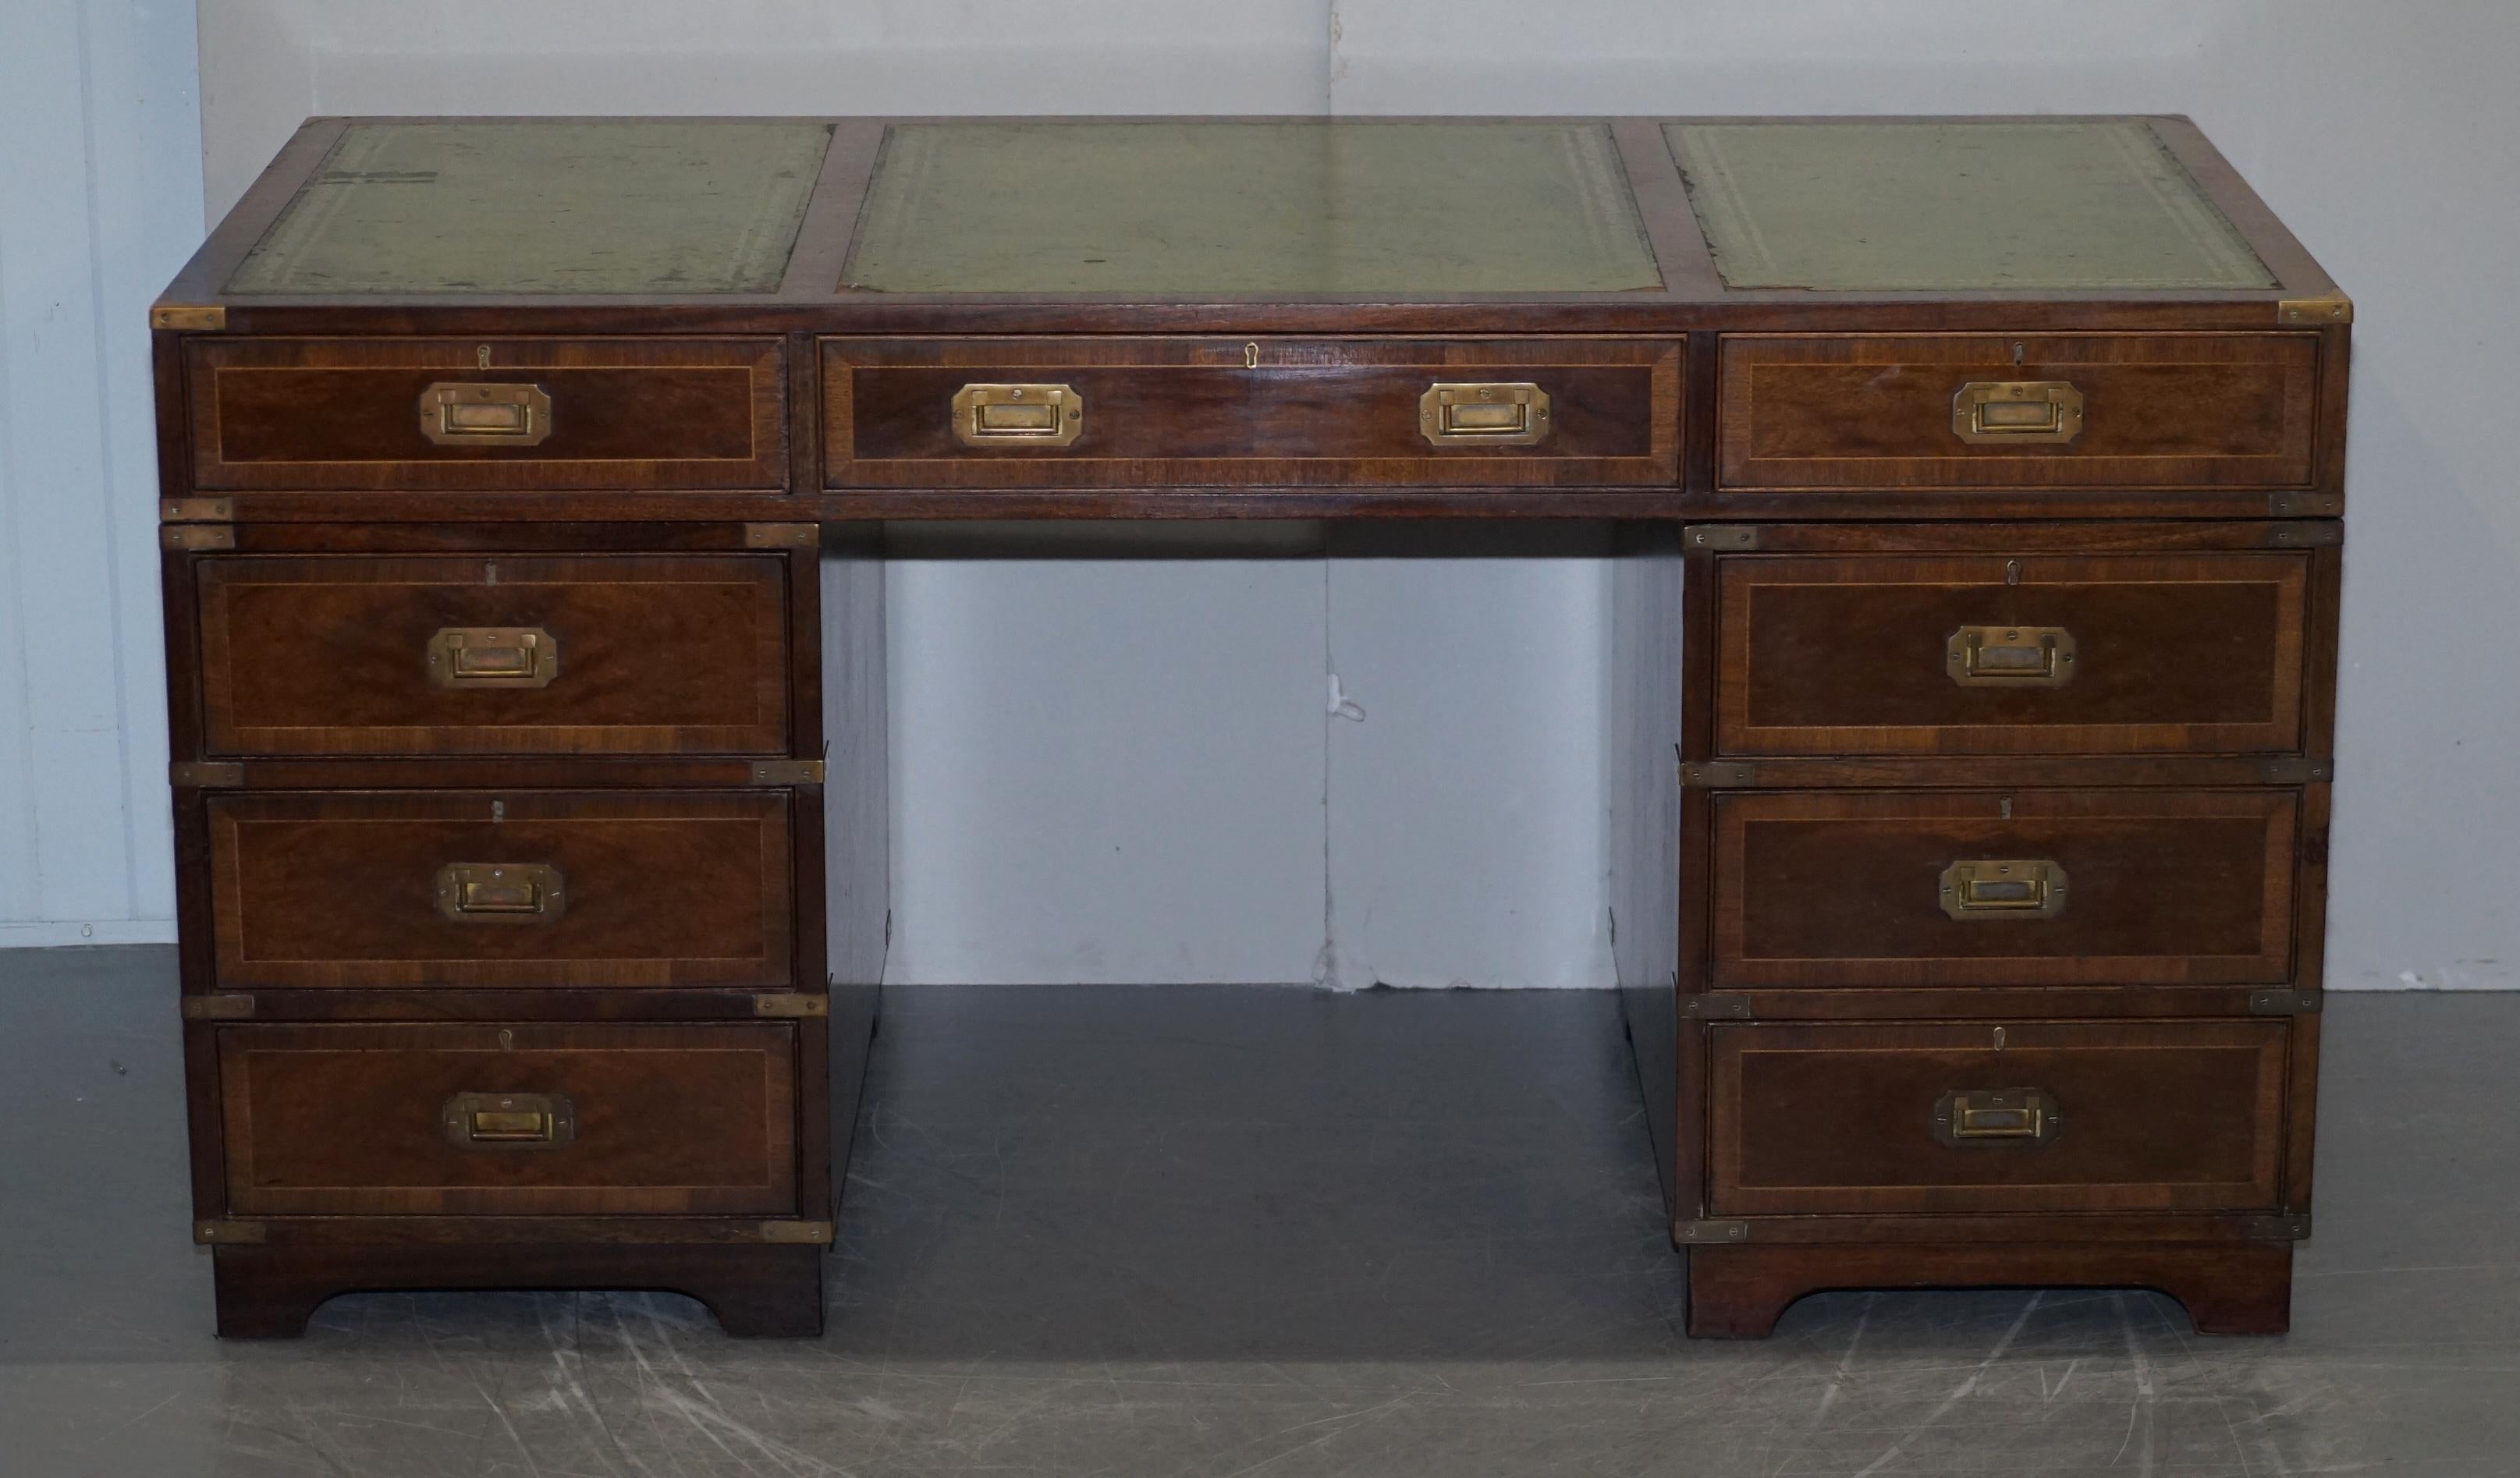 Wimbledon-Furniture

Wimbledon-Furniture is delighted to offer for sale this lovely very well made flamed mahogany Military Campaign partner desk with original distressed green leather writing surface  

Please note the delivery fee listed is